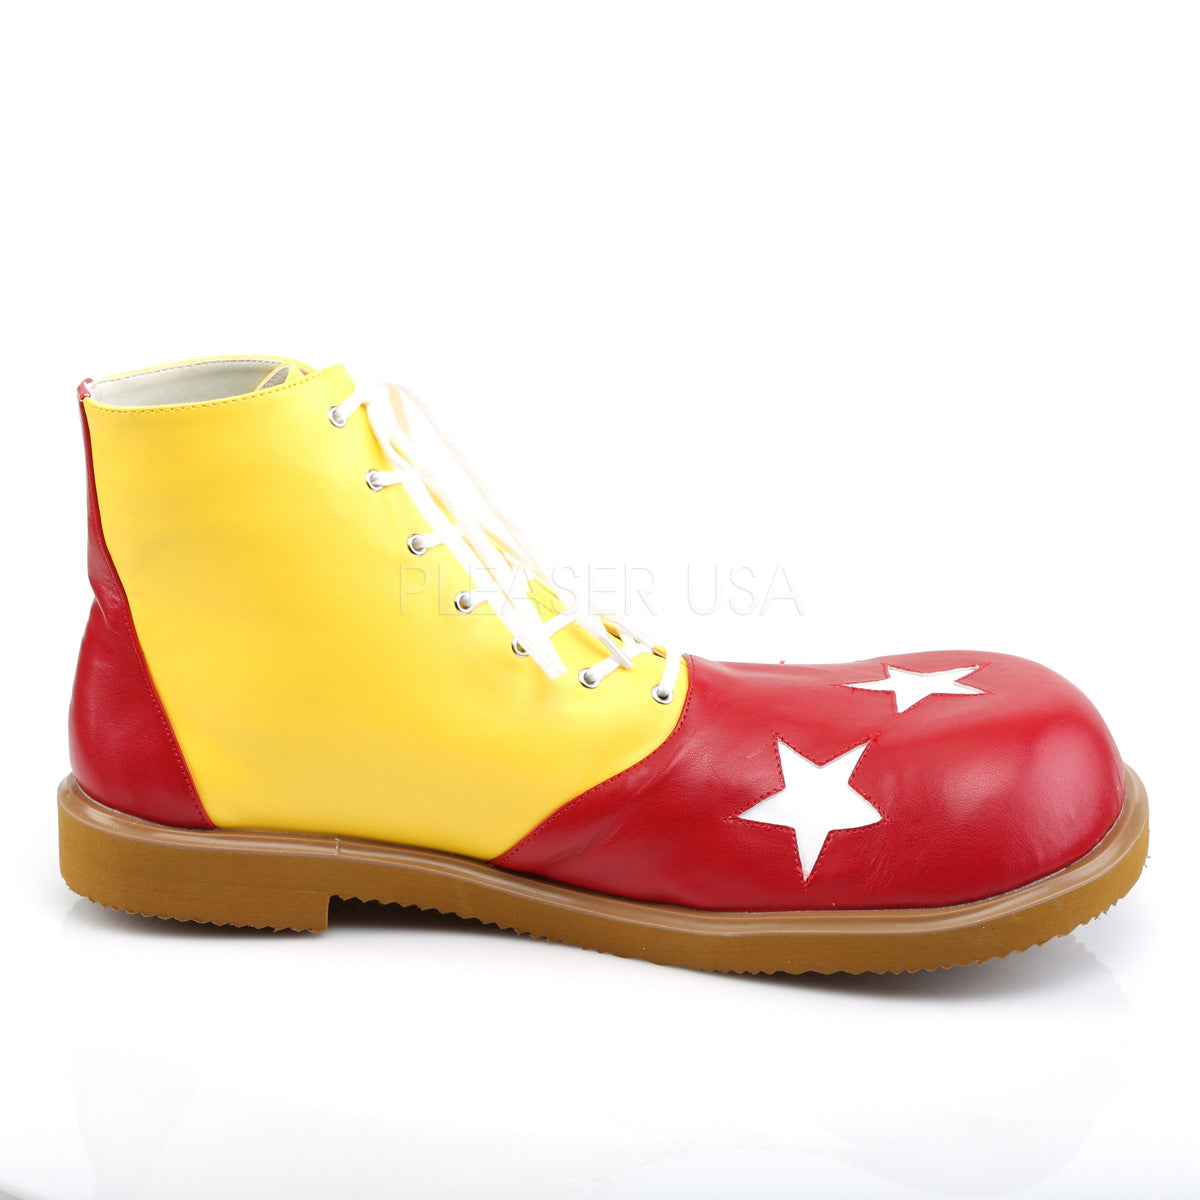 Yellow and Red Clown Shoes